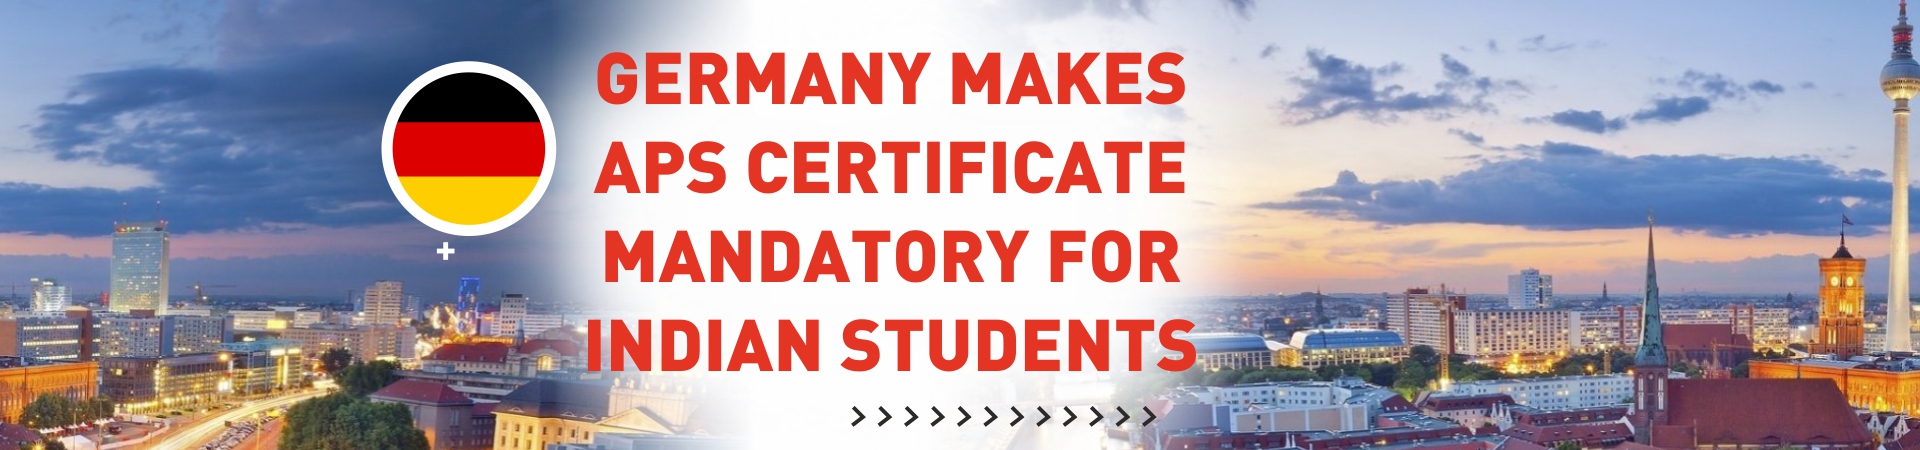 Germany makes APS certificate mandatory for Indian Students